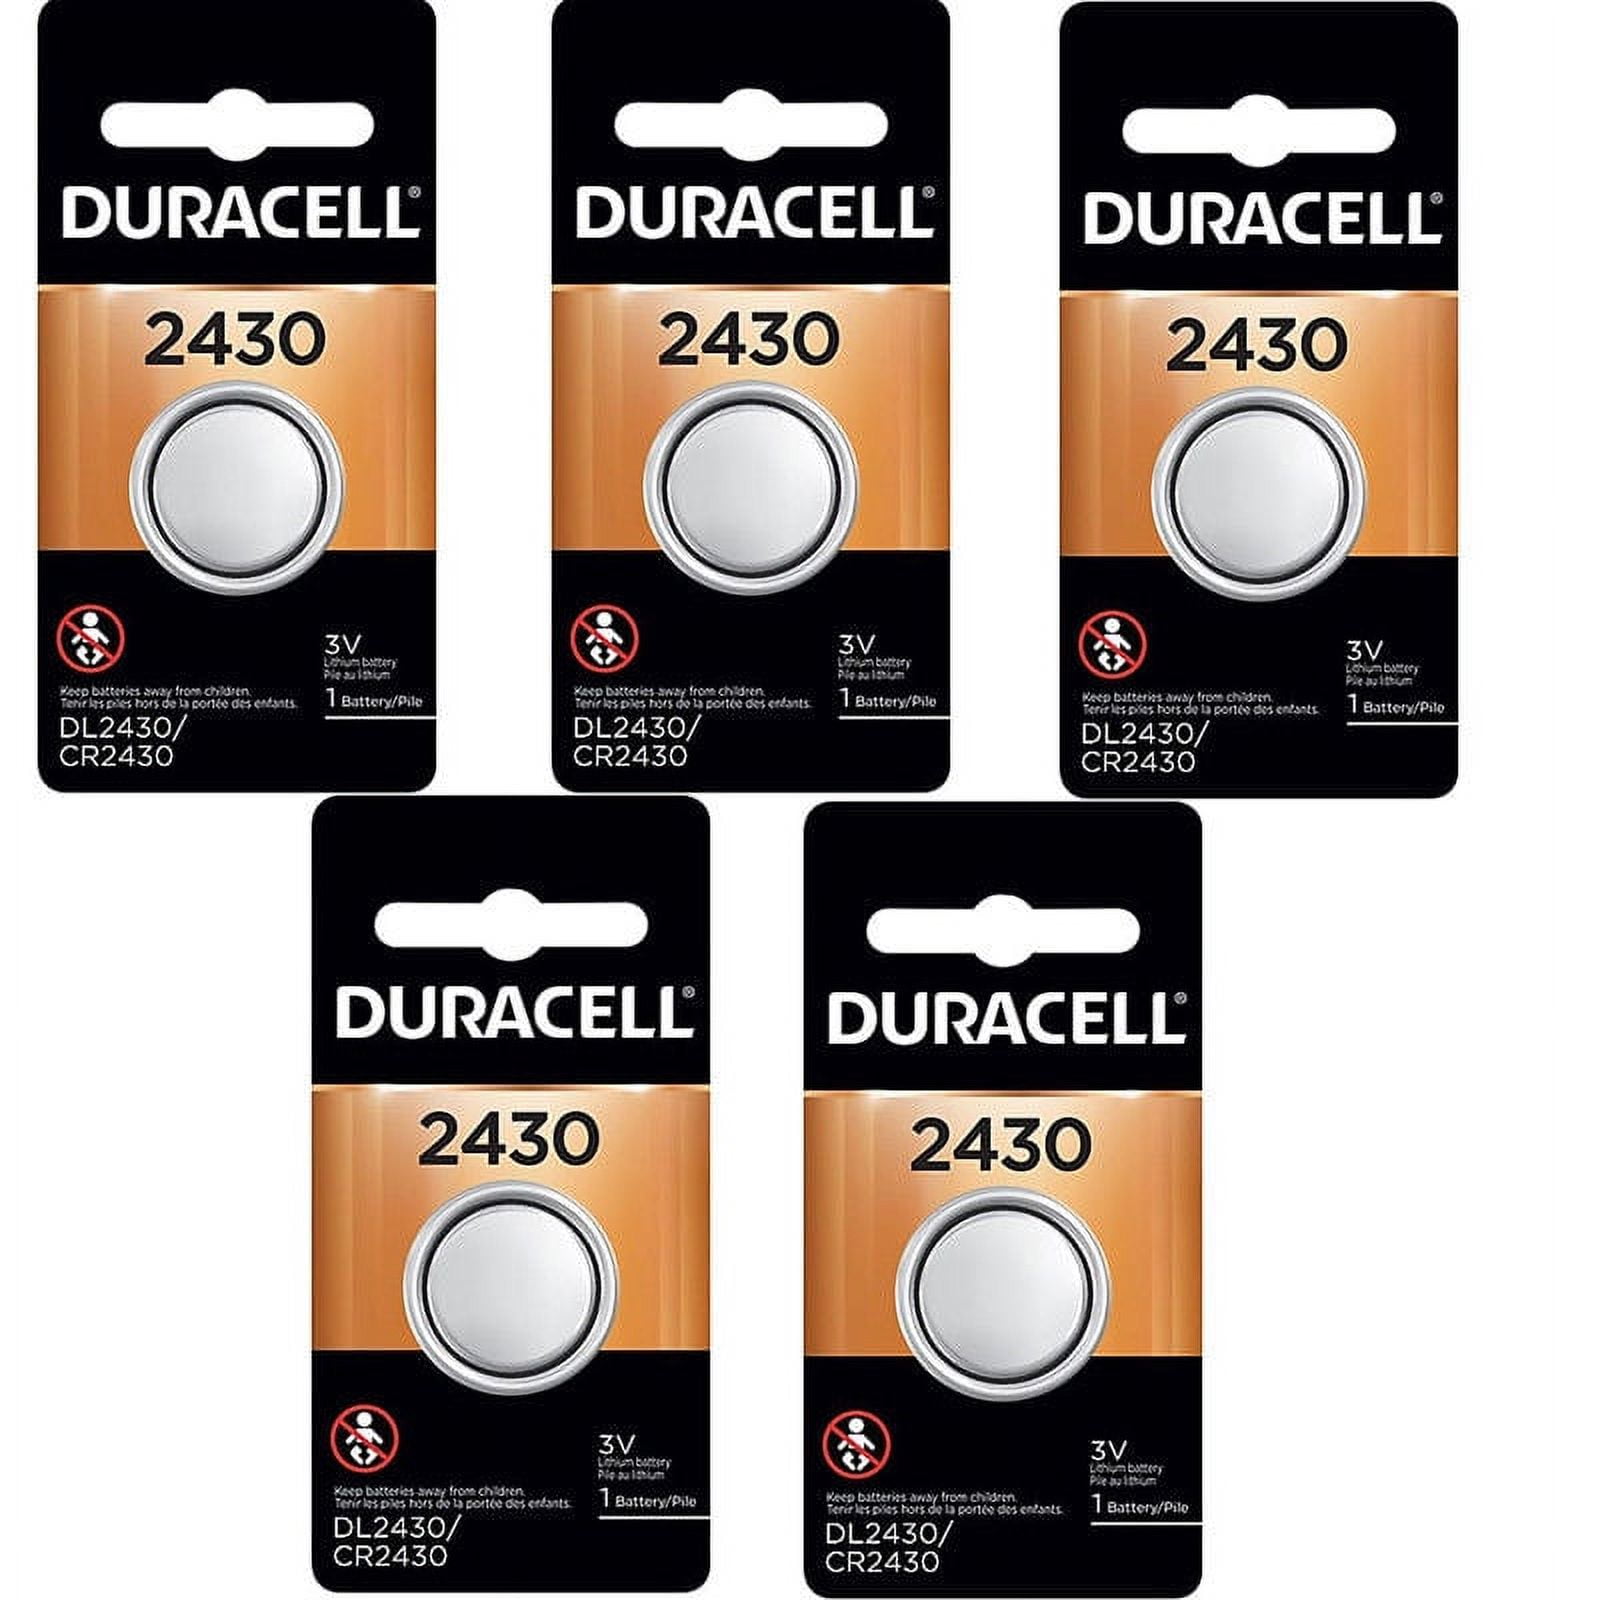 Duracell 2430 3V Lithium Coin Battery, 5/Pack 